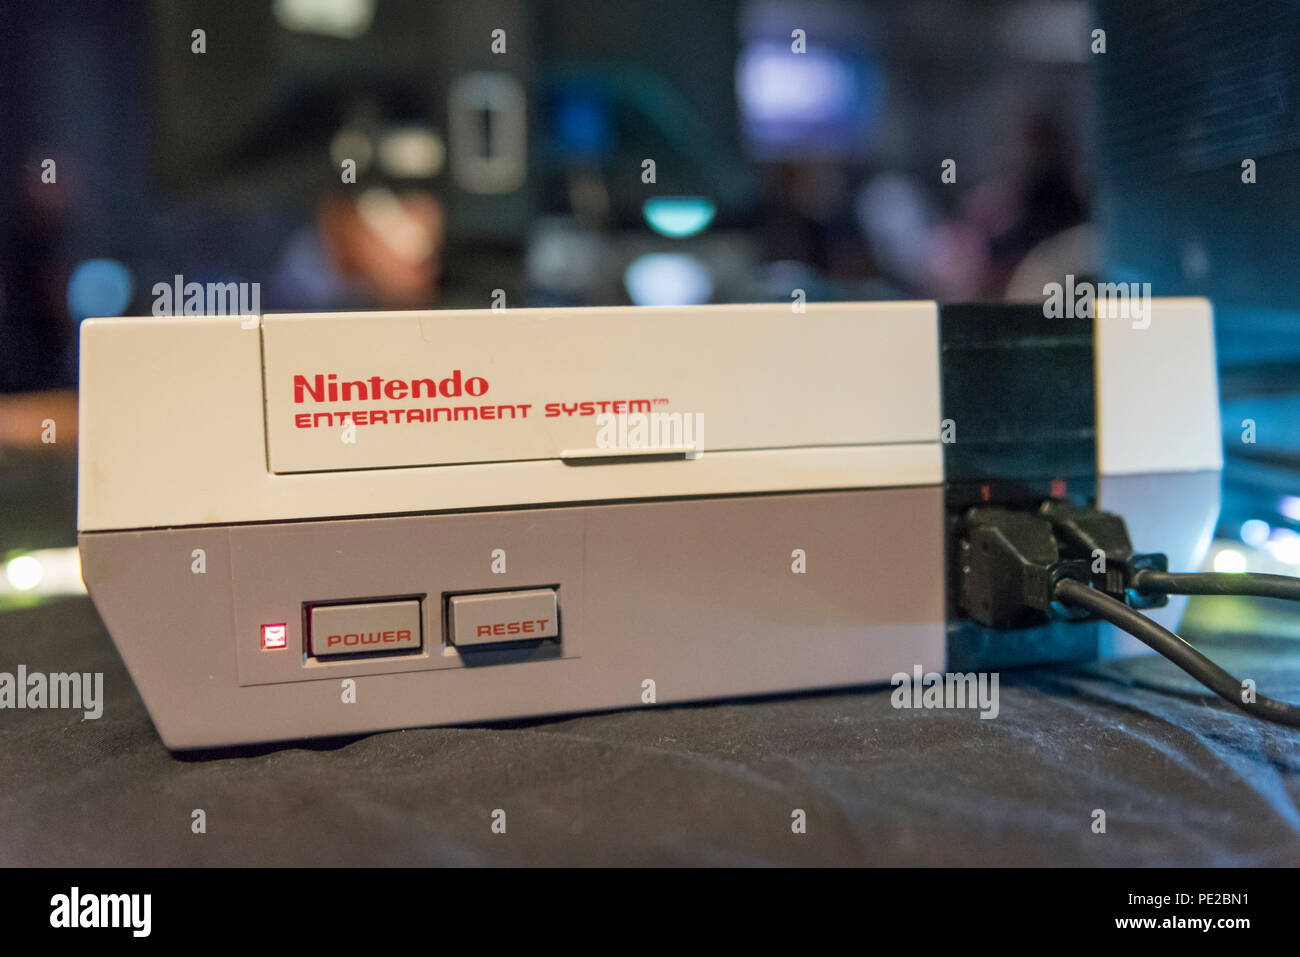 London, UK.  12 August 2018. A Nintendo Entertainment System console at retro games festival PLAY Expo held in London for the first time at Printworks, Canada Water. Game enthusiasts visited to rediscover the classics, from Donkey Kong, Pong, Super Mario Bros. and Space Invaders to vintage pinball machines, VR, indie games and a dedicated Minecraft zone. The show also included a sneak preview of new retro gaming streaming service, Antstream.  Credit: Stephen Chung / Alamy Live News Stock Photo